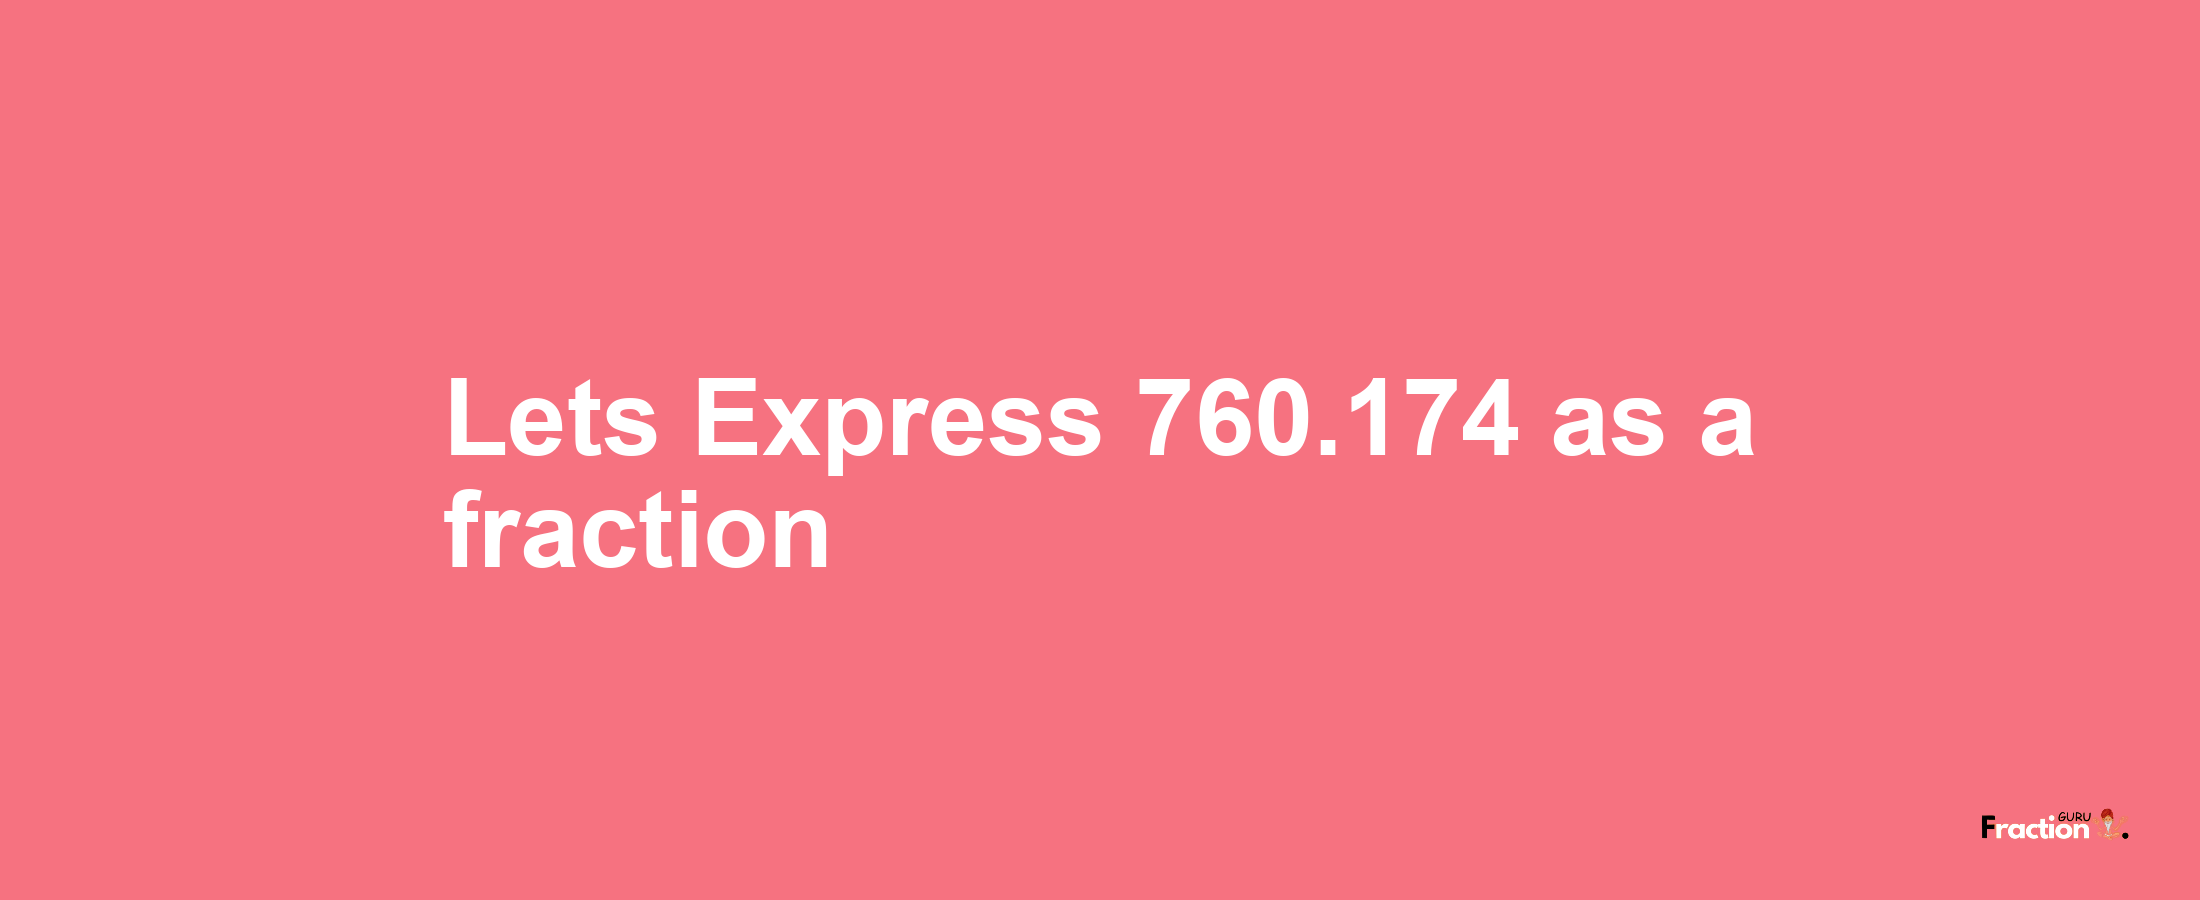 Lets Express 760.174 as afraction